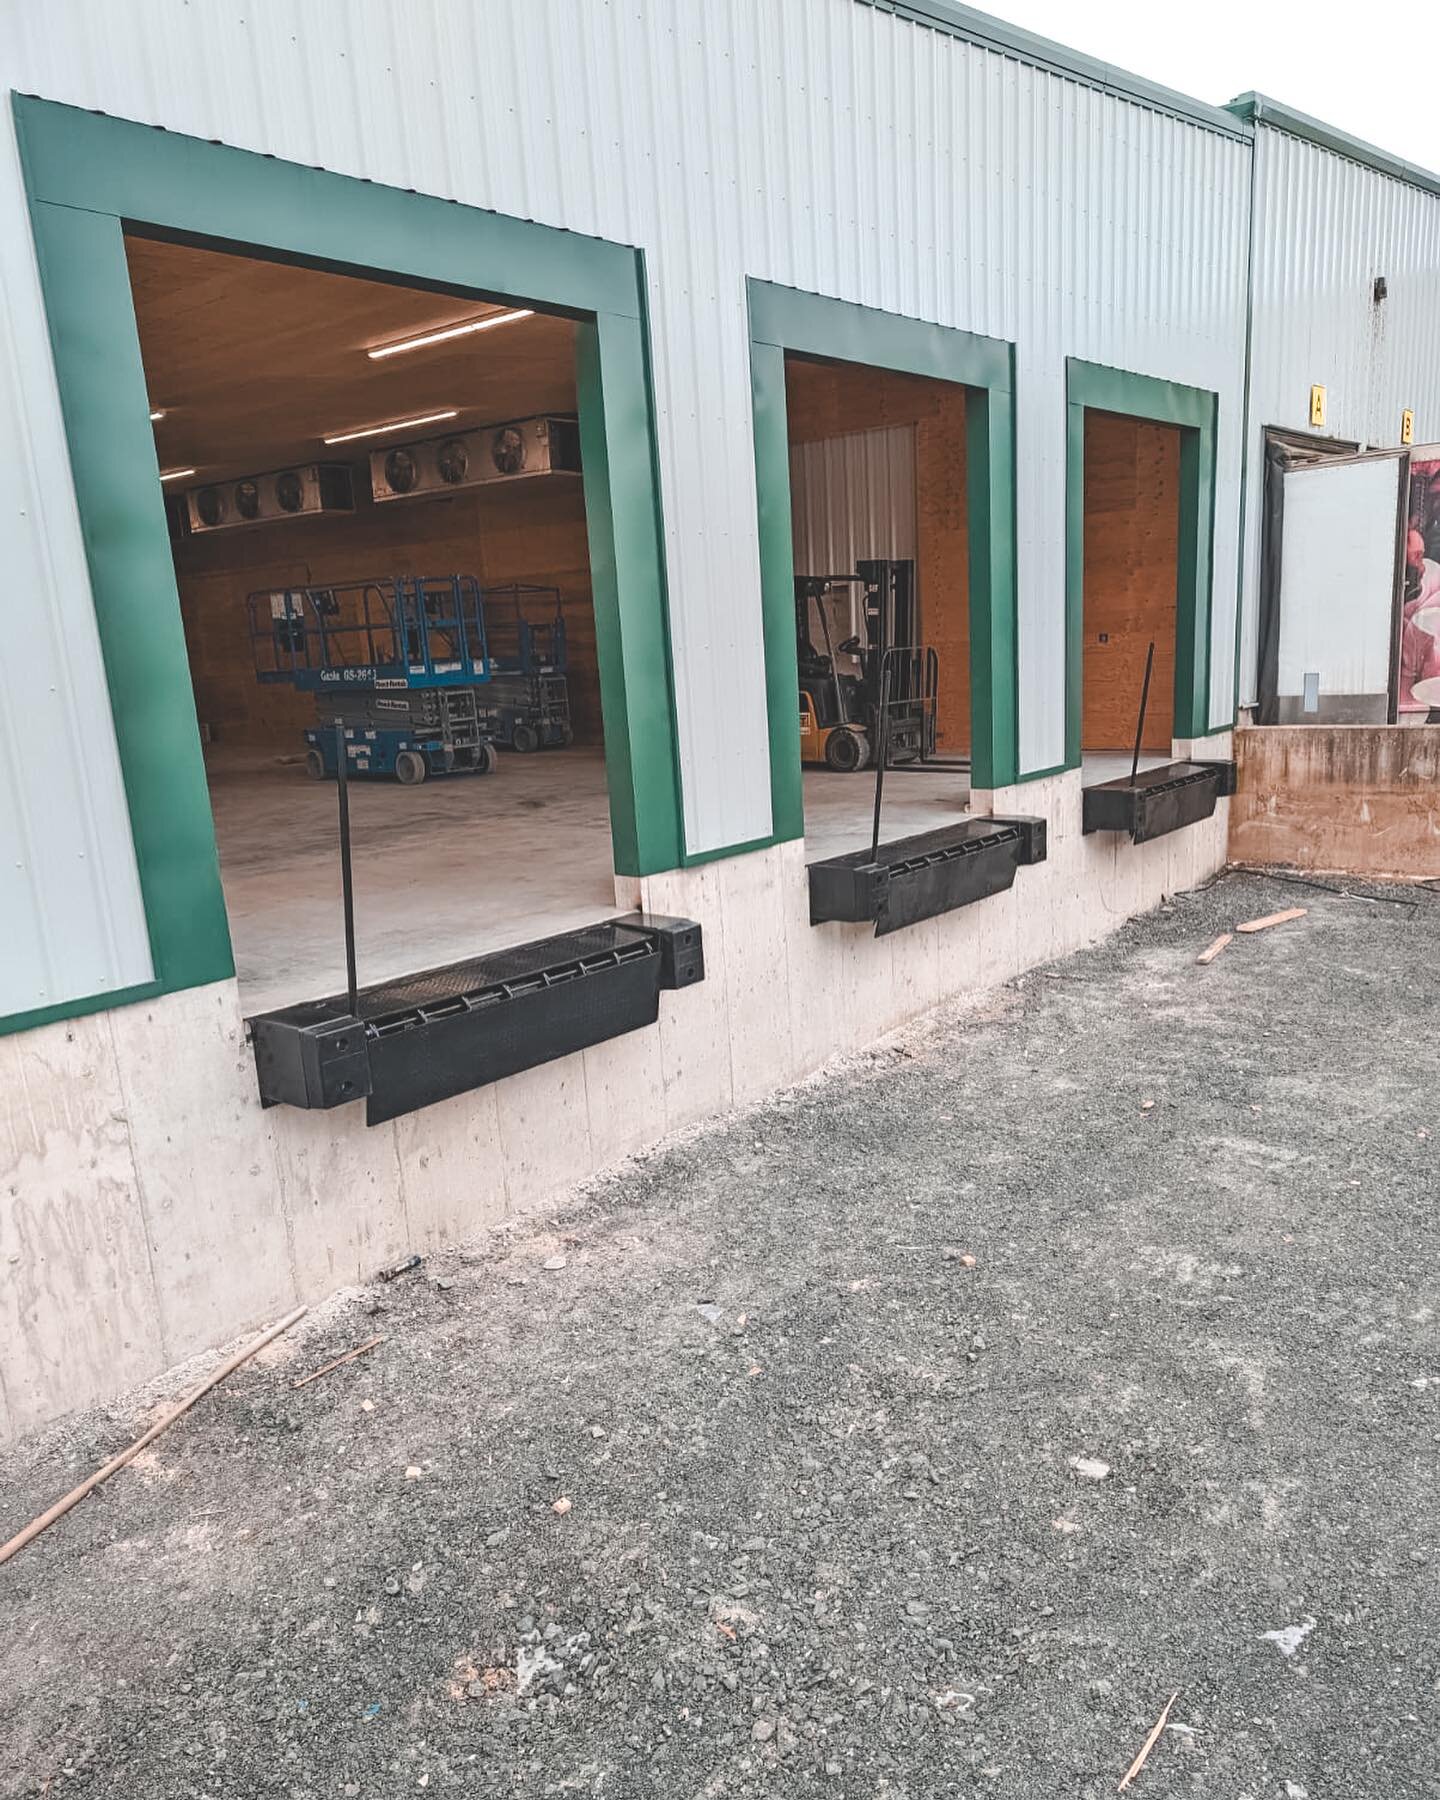 Recent job @quiksfarm where we fabricated and installed manual loading dock levelers. They will do the job for years to come💯. 

#outlawindustriesltd #customfabricationshop #chilliwackcustomfab #metalwork #custommetalfabrication